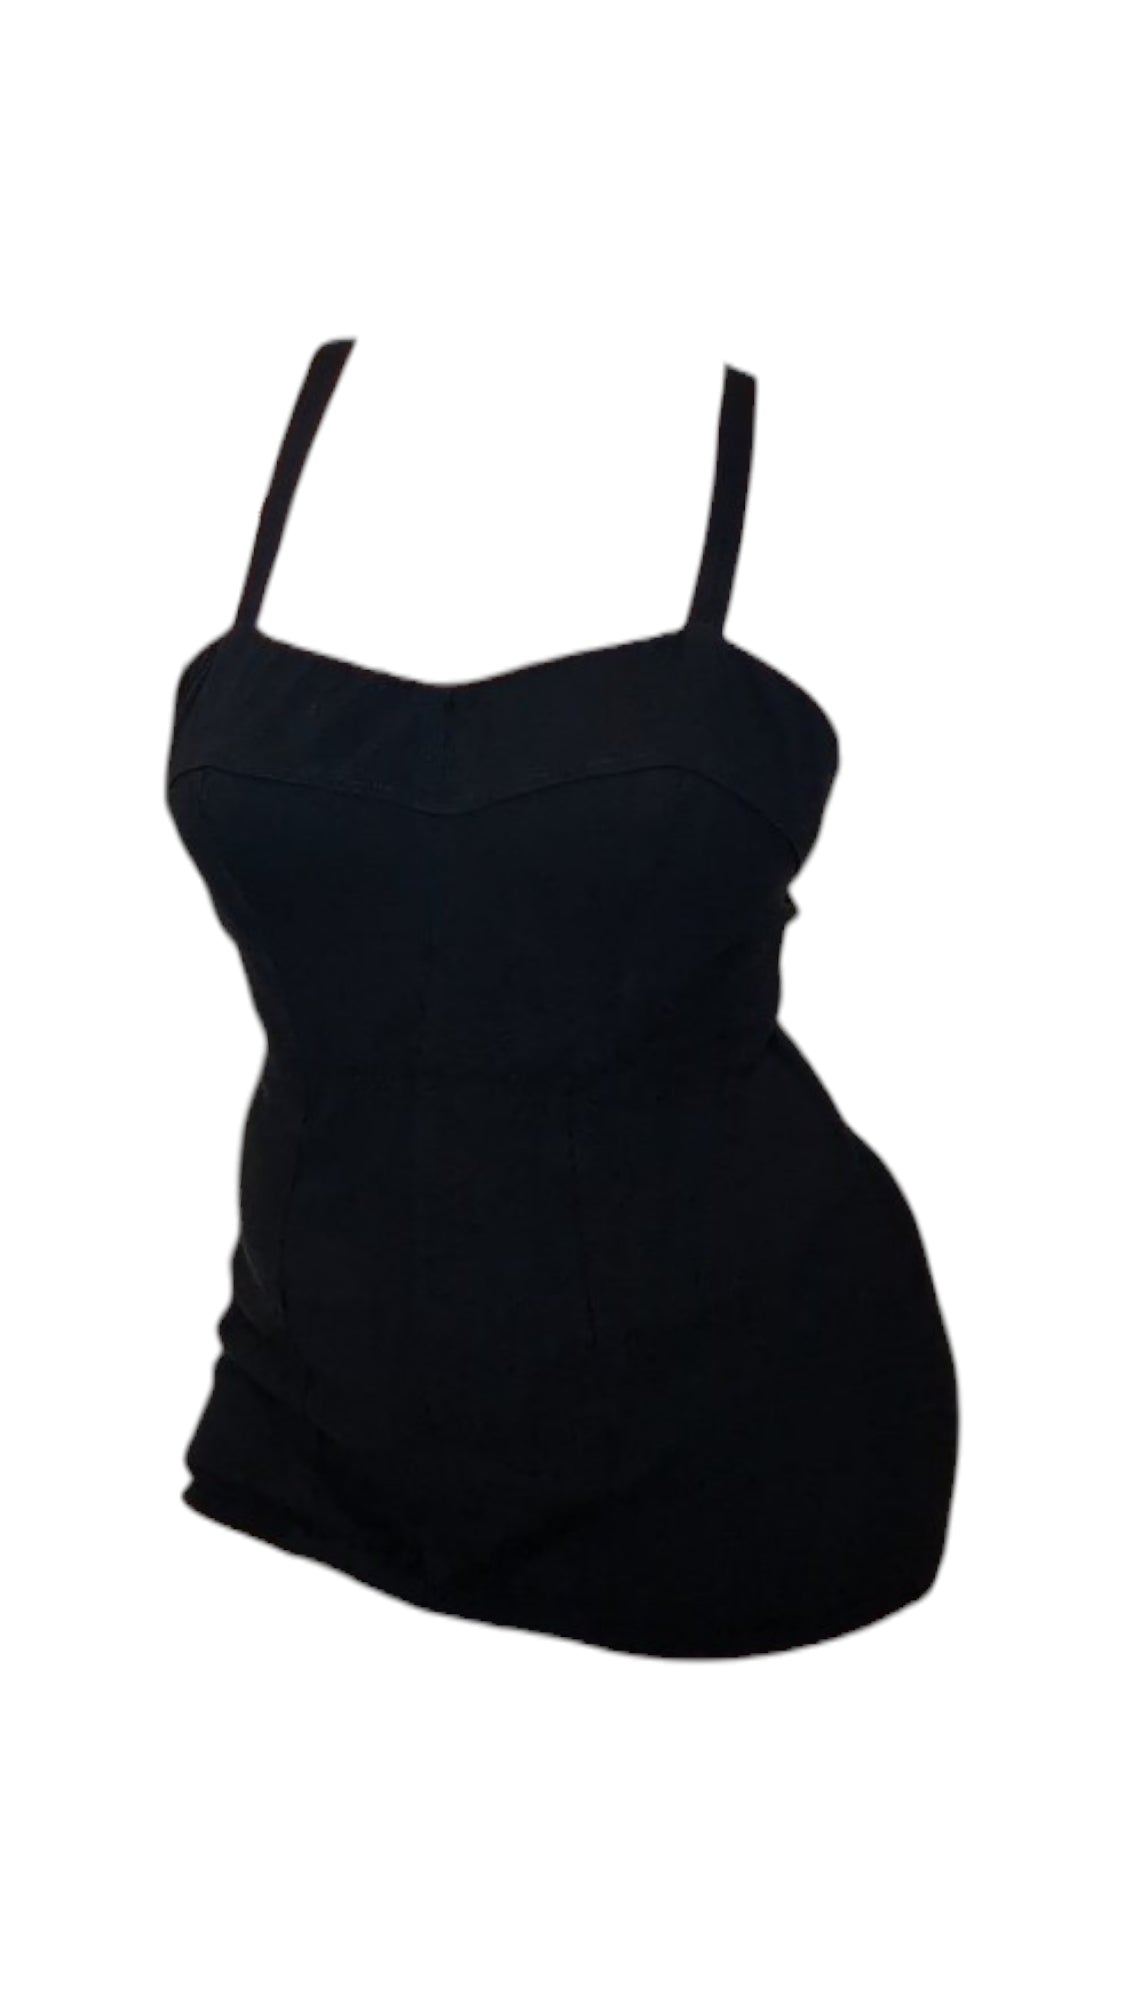 1940s-1950s Jantzen Sheath Style Bathing Suit with Adjustable and Customizable Straps